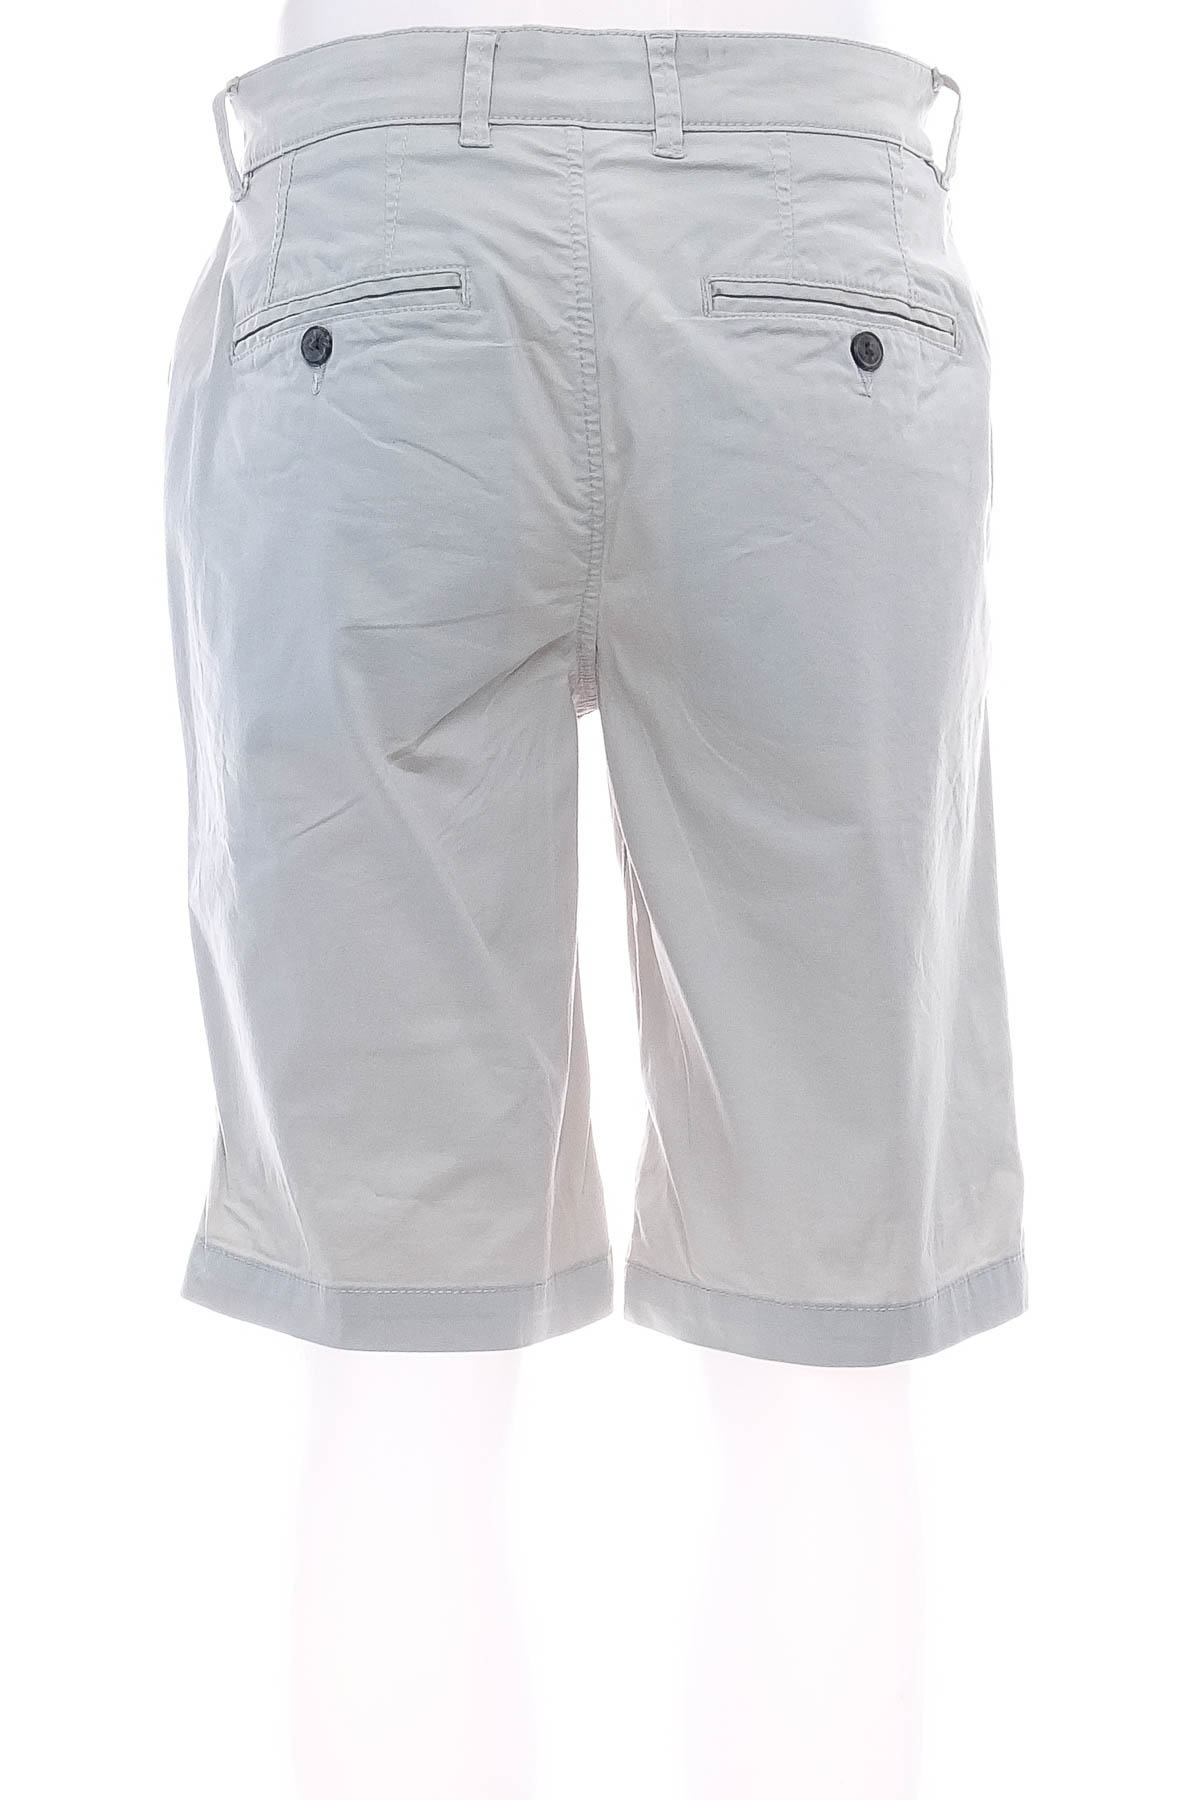 Men's shorts - SELECTED HOMME - 1